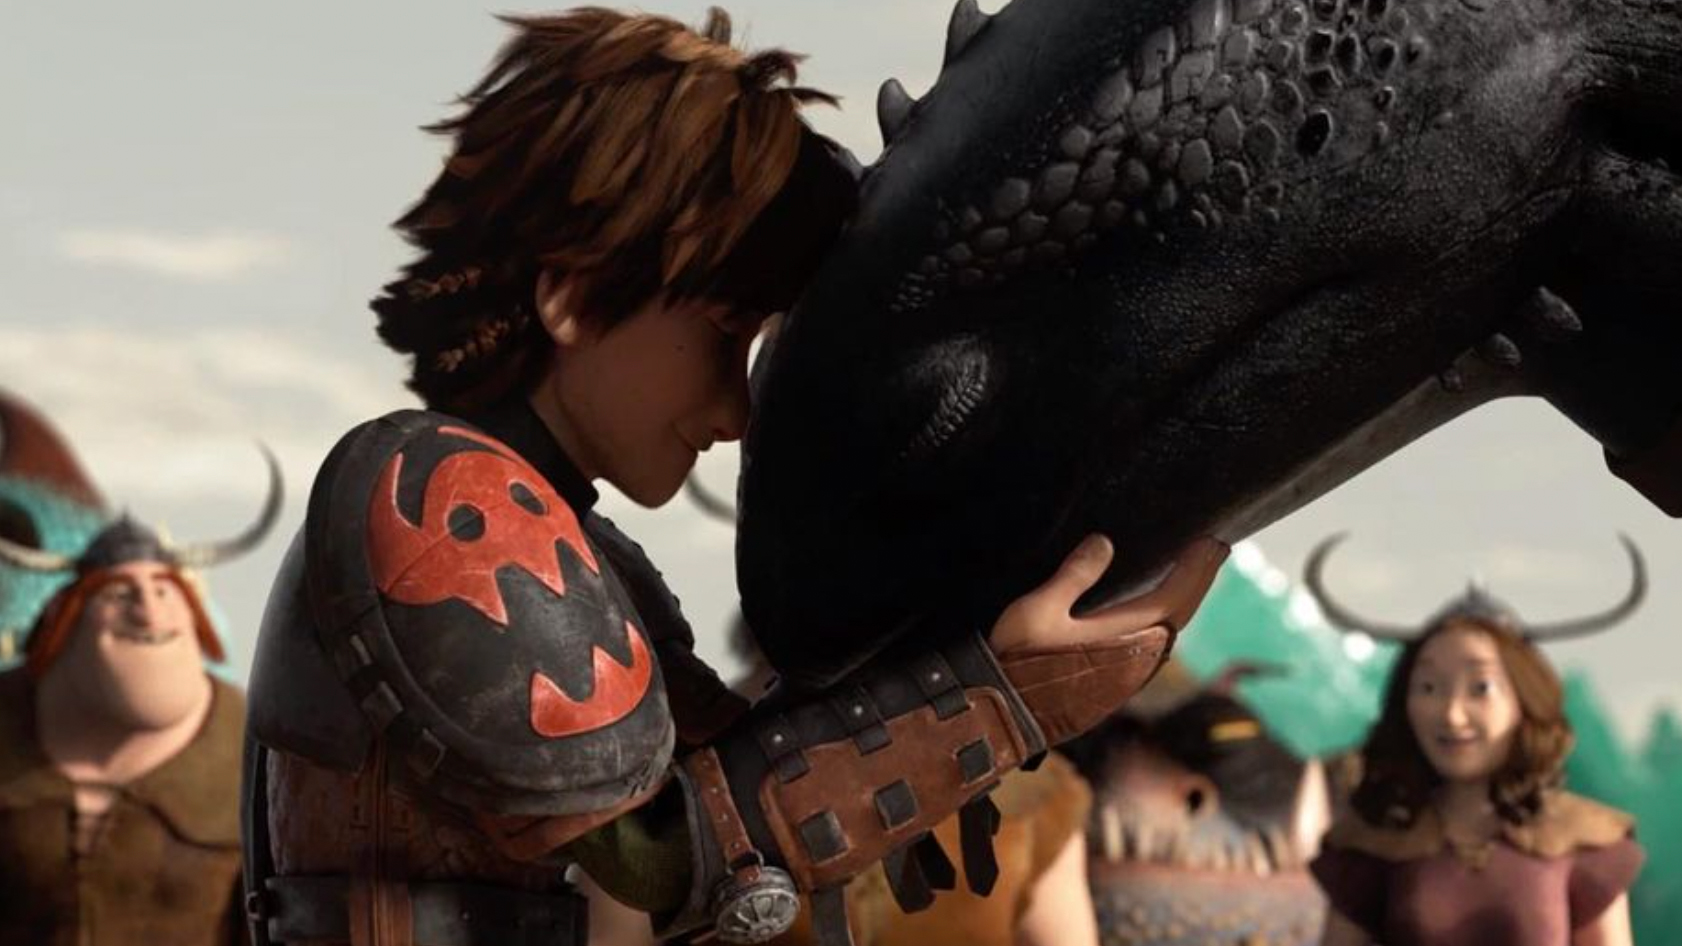 HOW TO TRAIN YOUR DRAGON - Movieguide